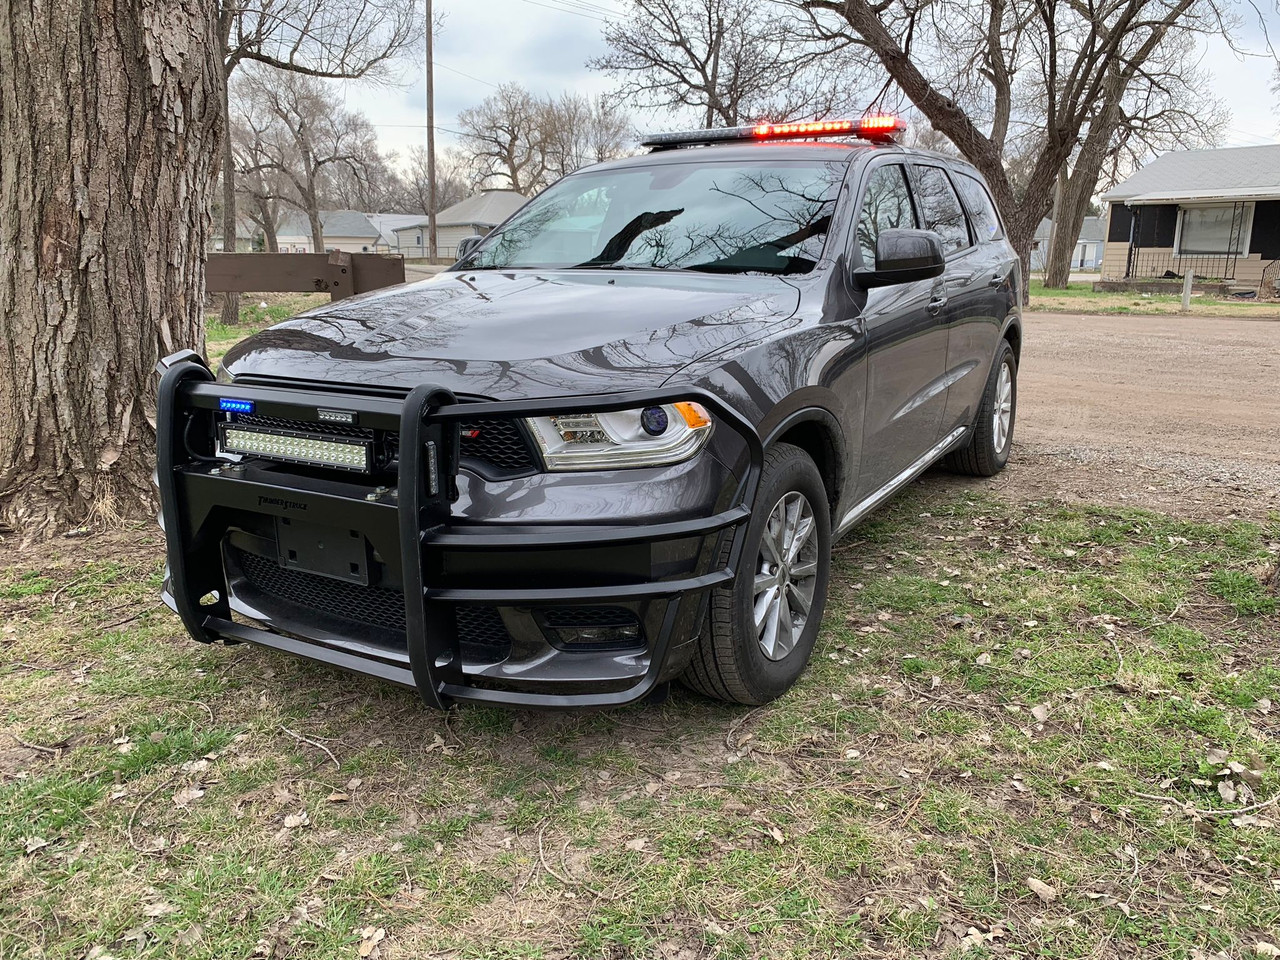 Thunder Struck DDR19-100TVI Grille Guard with Police Center Section & TVI Wrap Supports Compatible with Dodge Durango 2019-2020